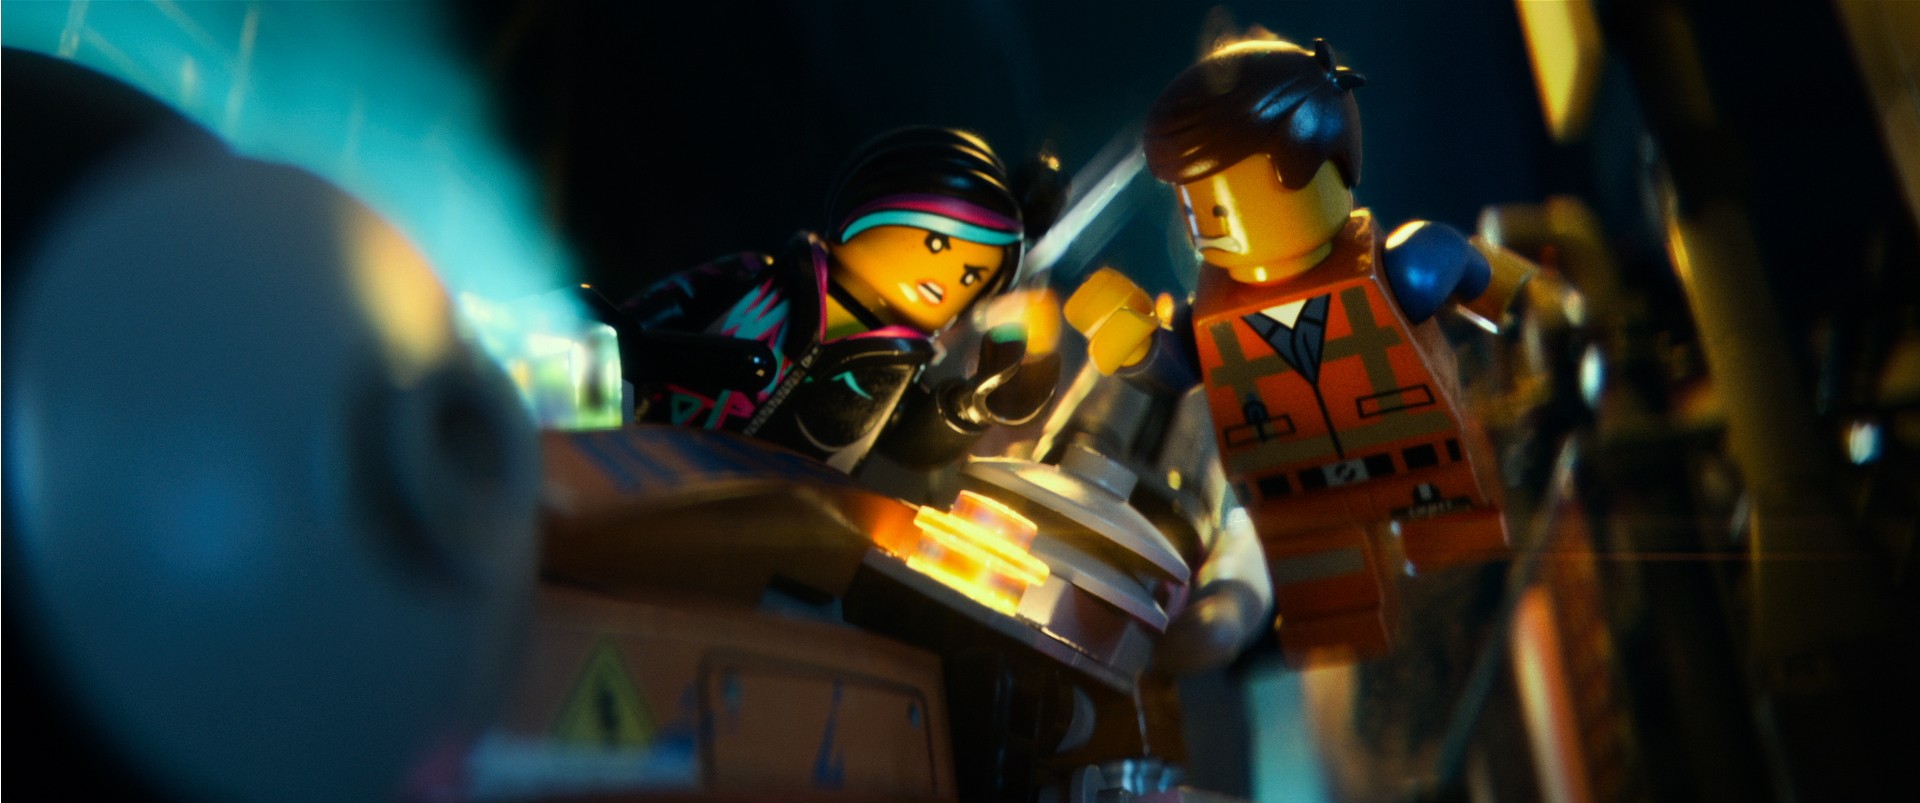 Lucy and Emmet from Warner Bros. Pictures' The Lego Movie (2014)